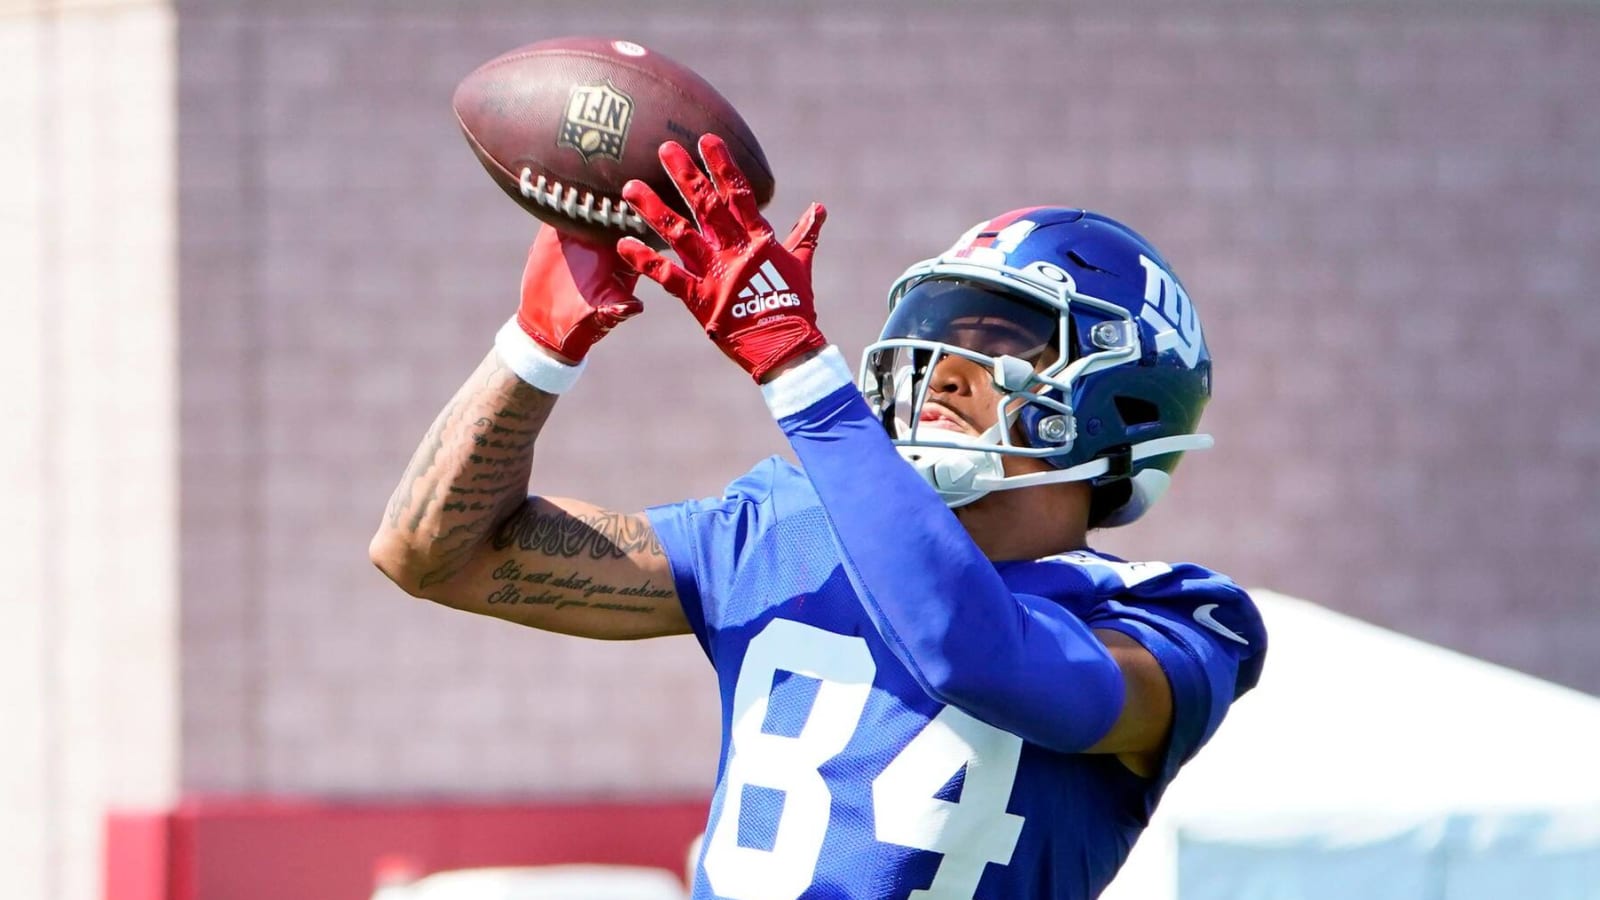 Giants WR points to play that changed game in huge comeback win